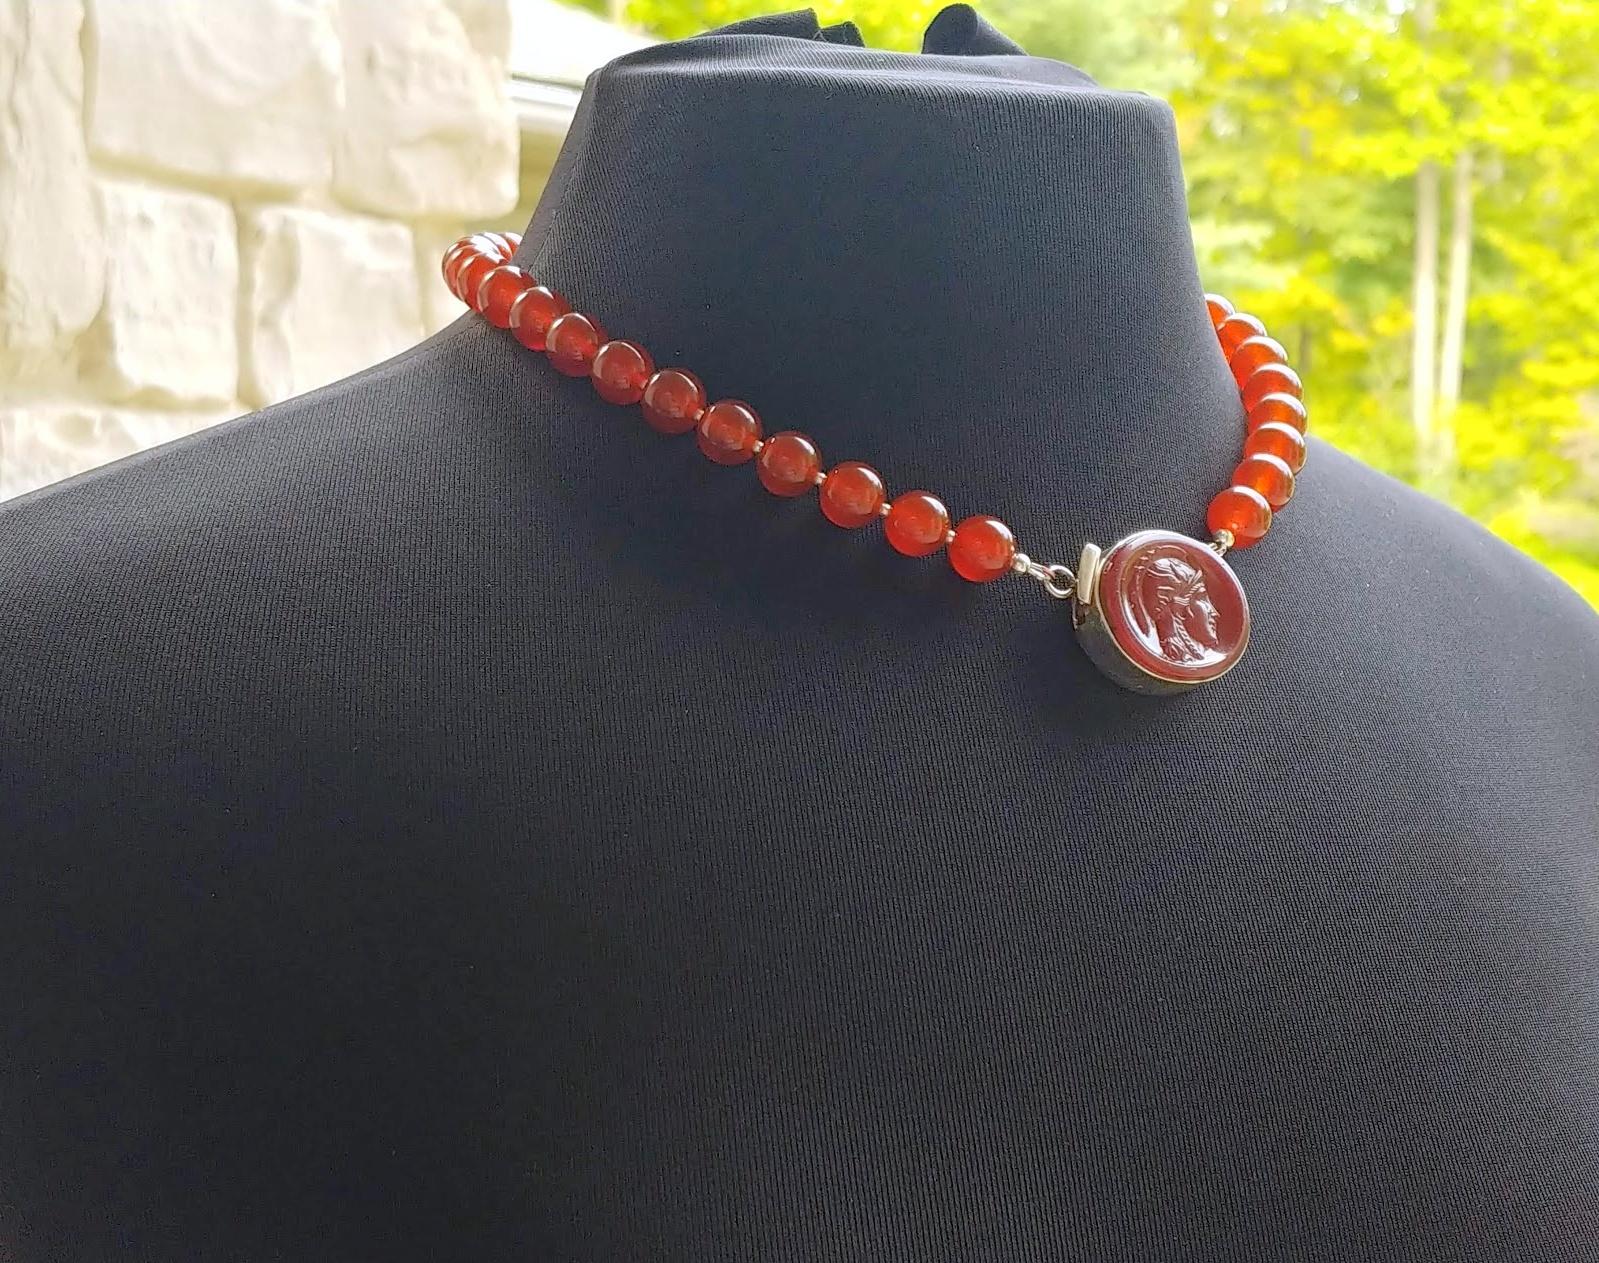 The length of the necklace is 19 inches (48 cm). The size of one bead is 10 mm.
The color of the beads is uniform, semi-transparent, the color of red currant or the warm shade of the strawberry jam. In bright sunlight, the necklace is caramel